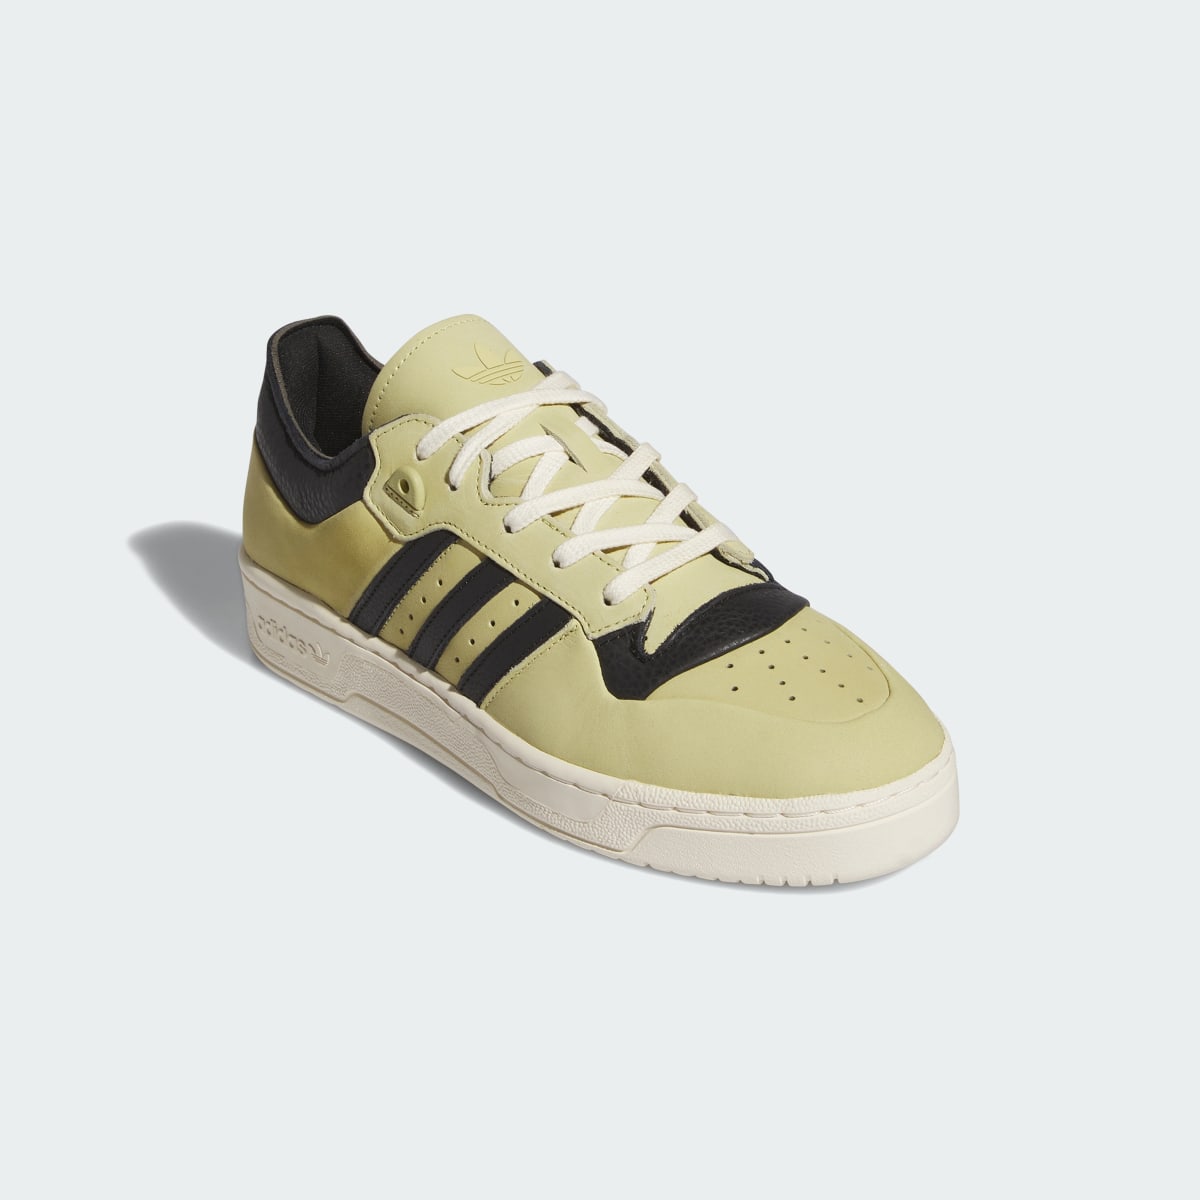 Adidas Sapatilhas Rivalry 86 Low 001. 5